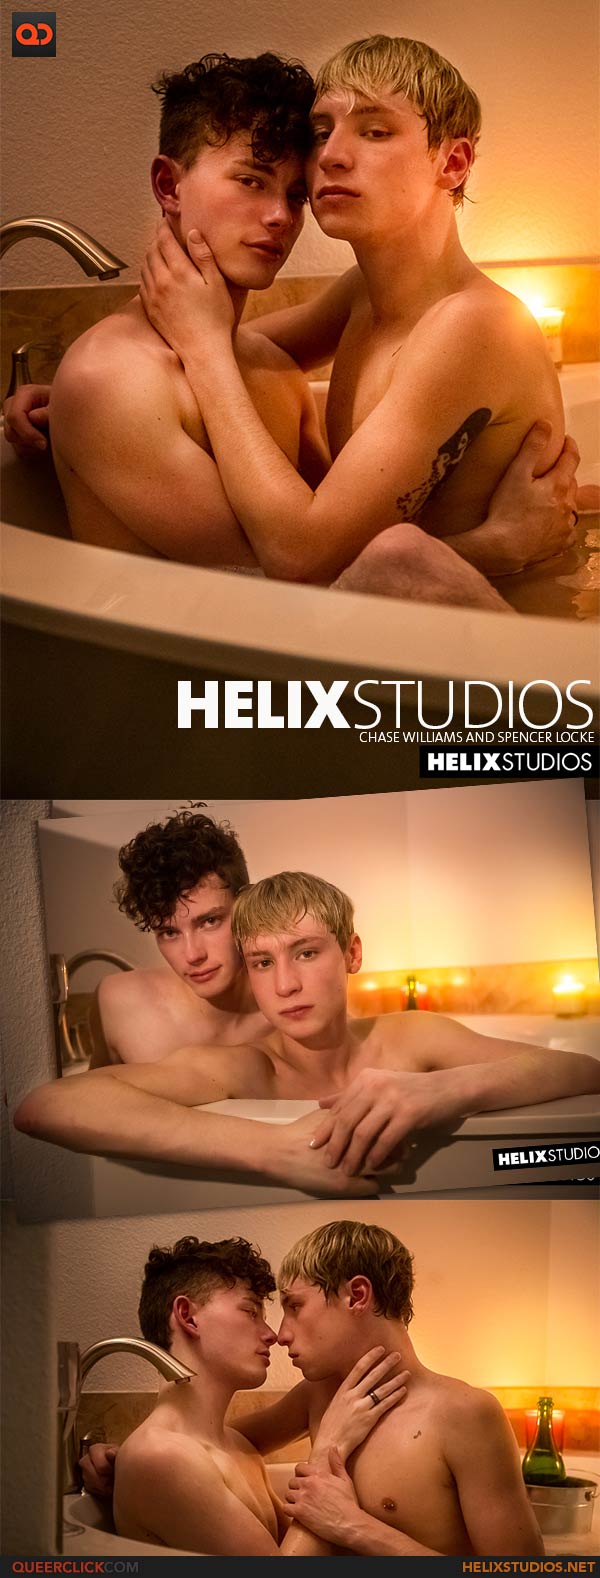 Helix Studios: Chase Williams and Spencer Locke